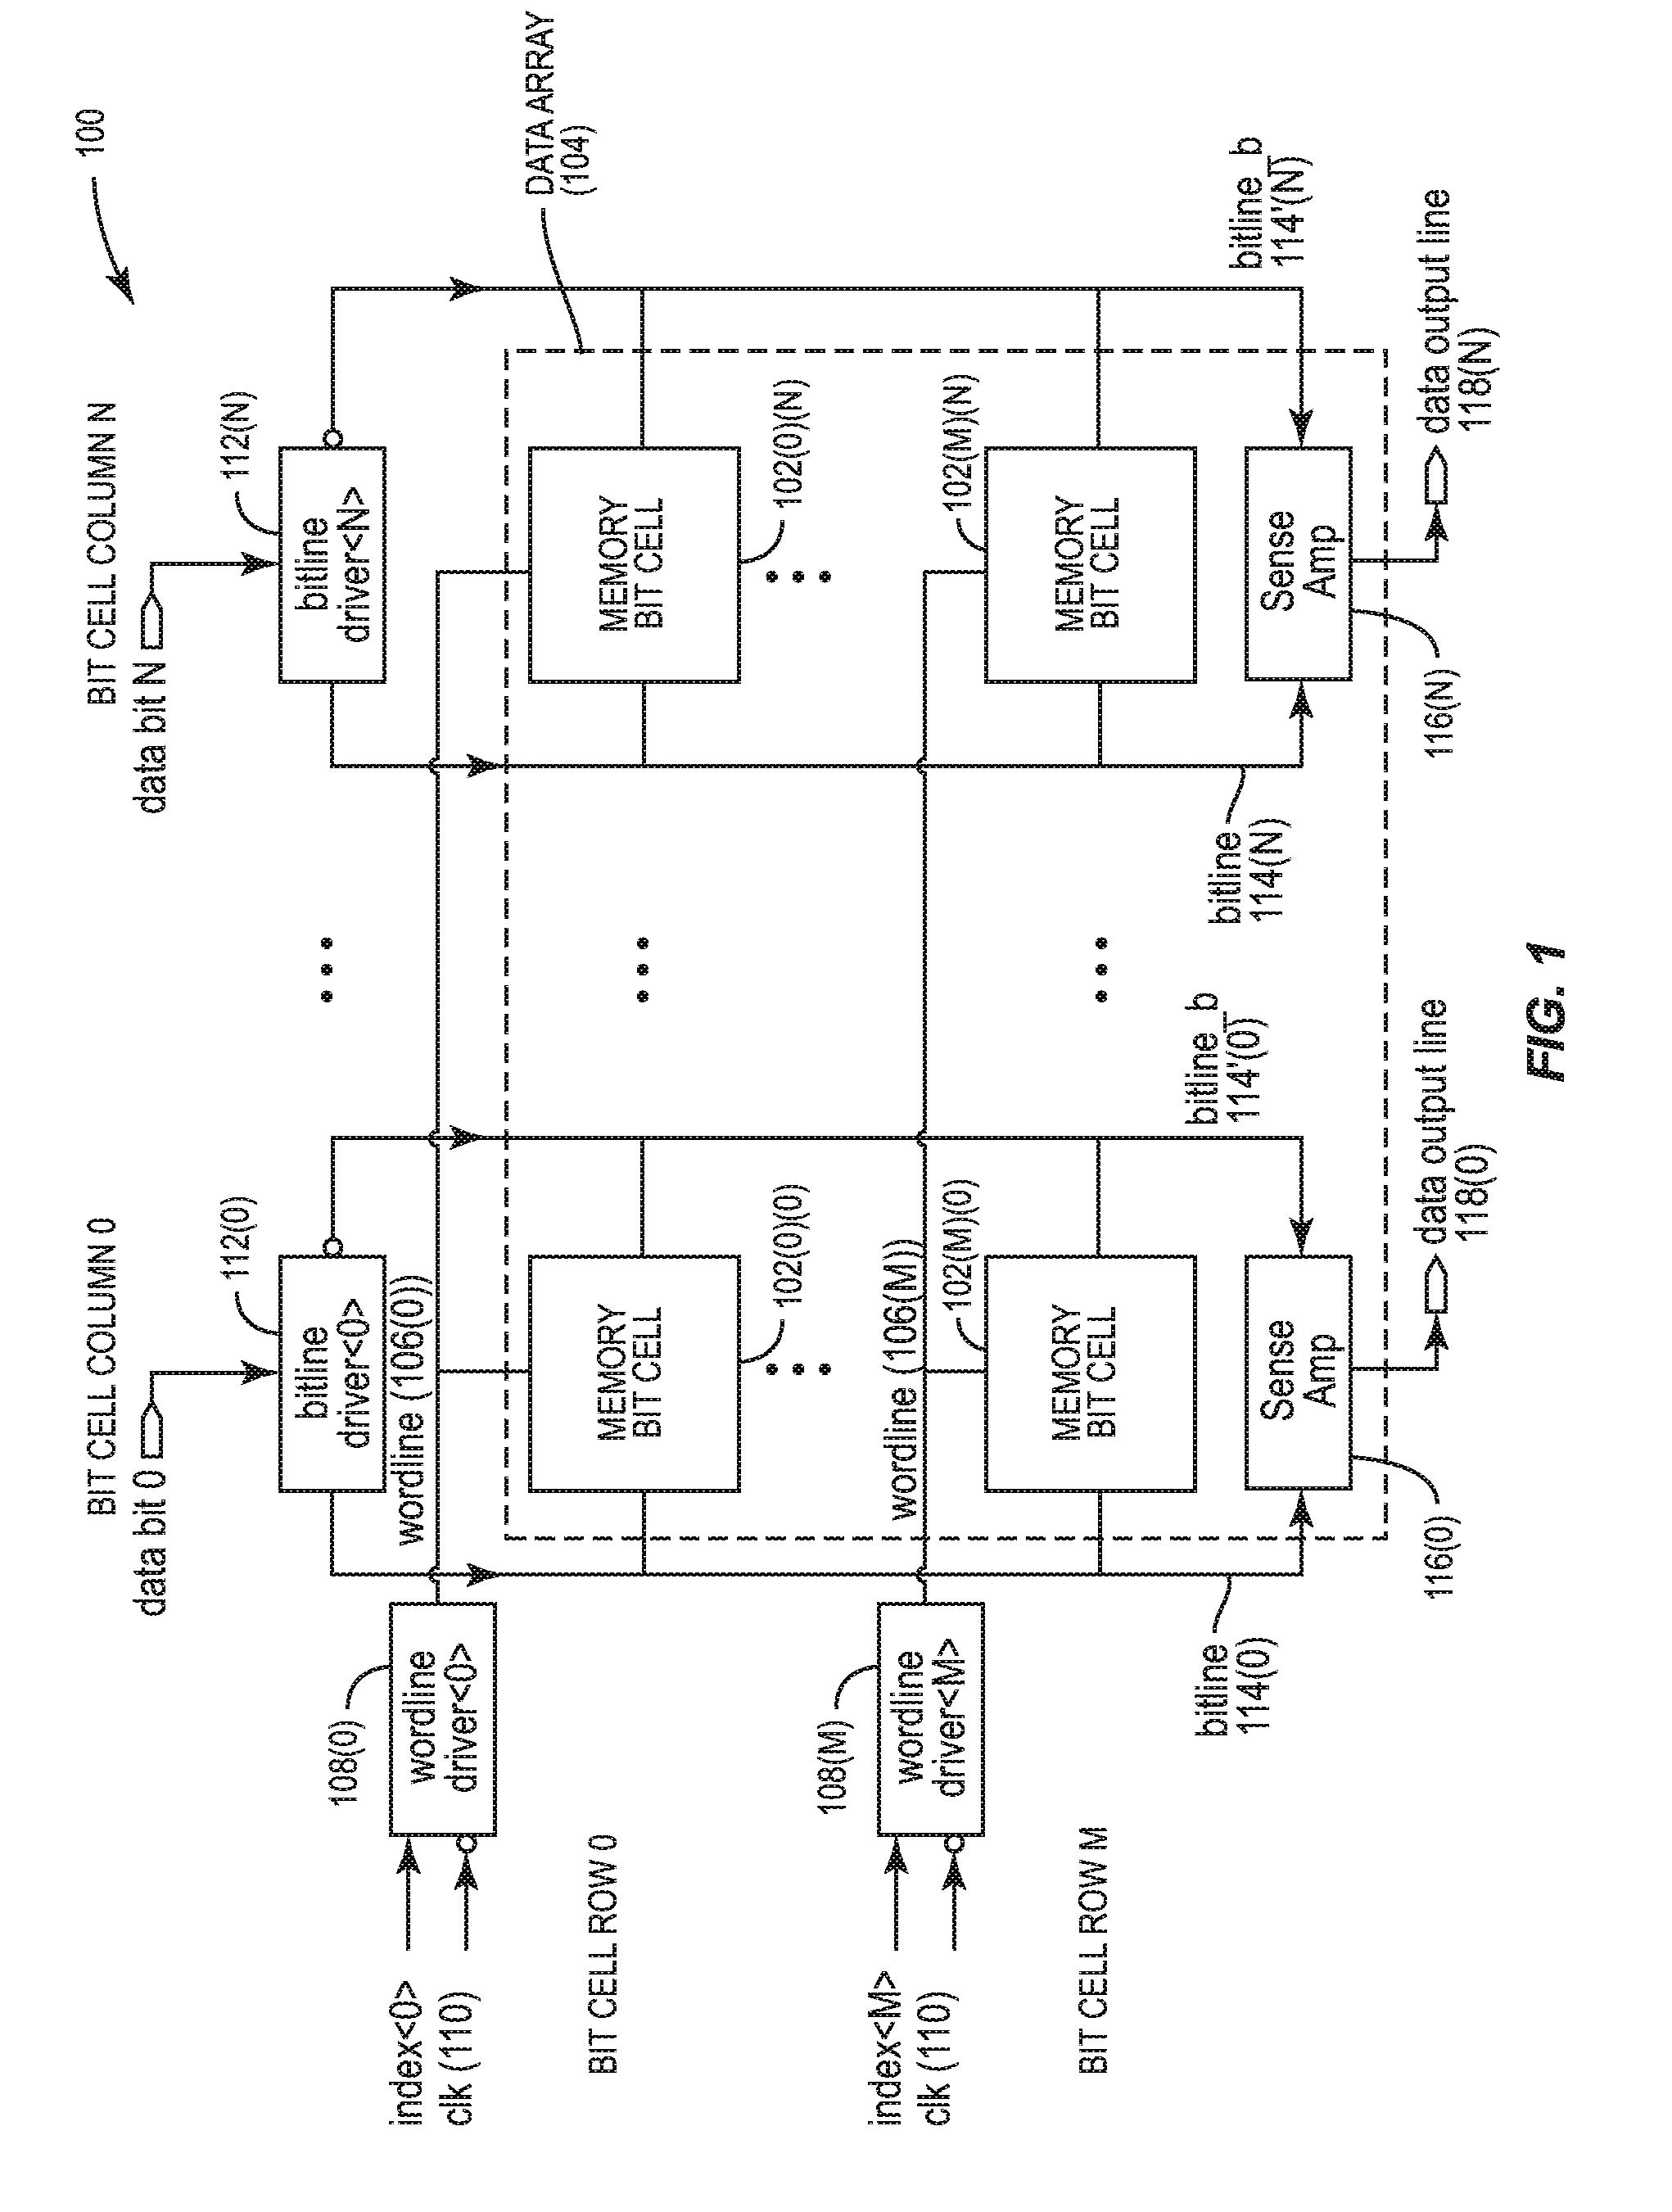 Read-assist circuits for memory bit cells employing a p-type field-effect transistor (PFET) read port(s), and related memory systems and methods